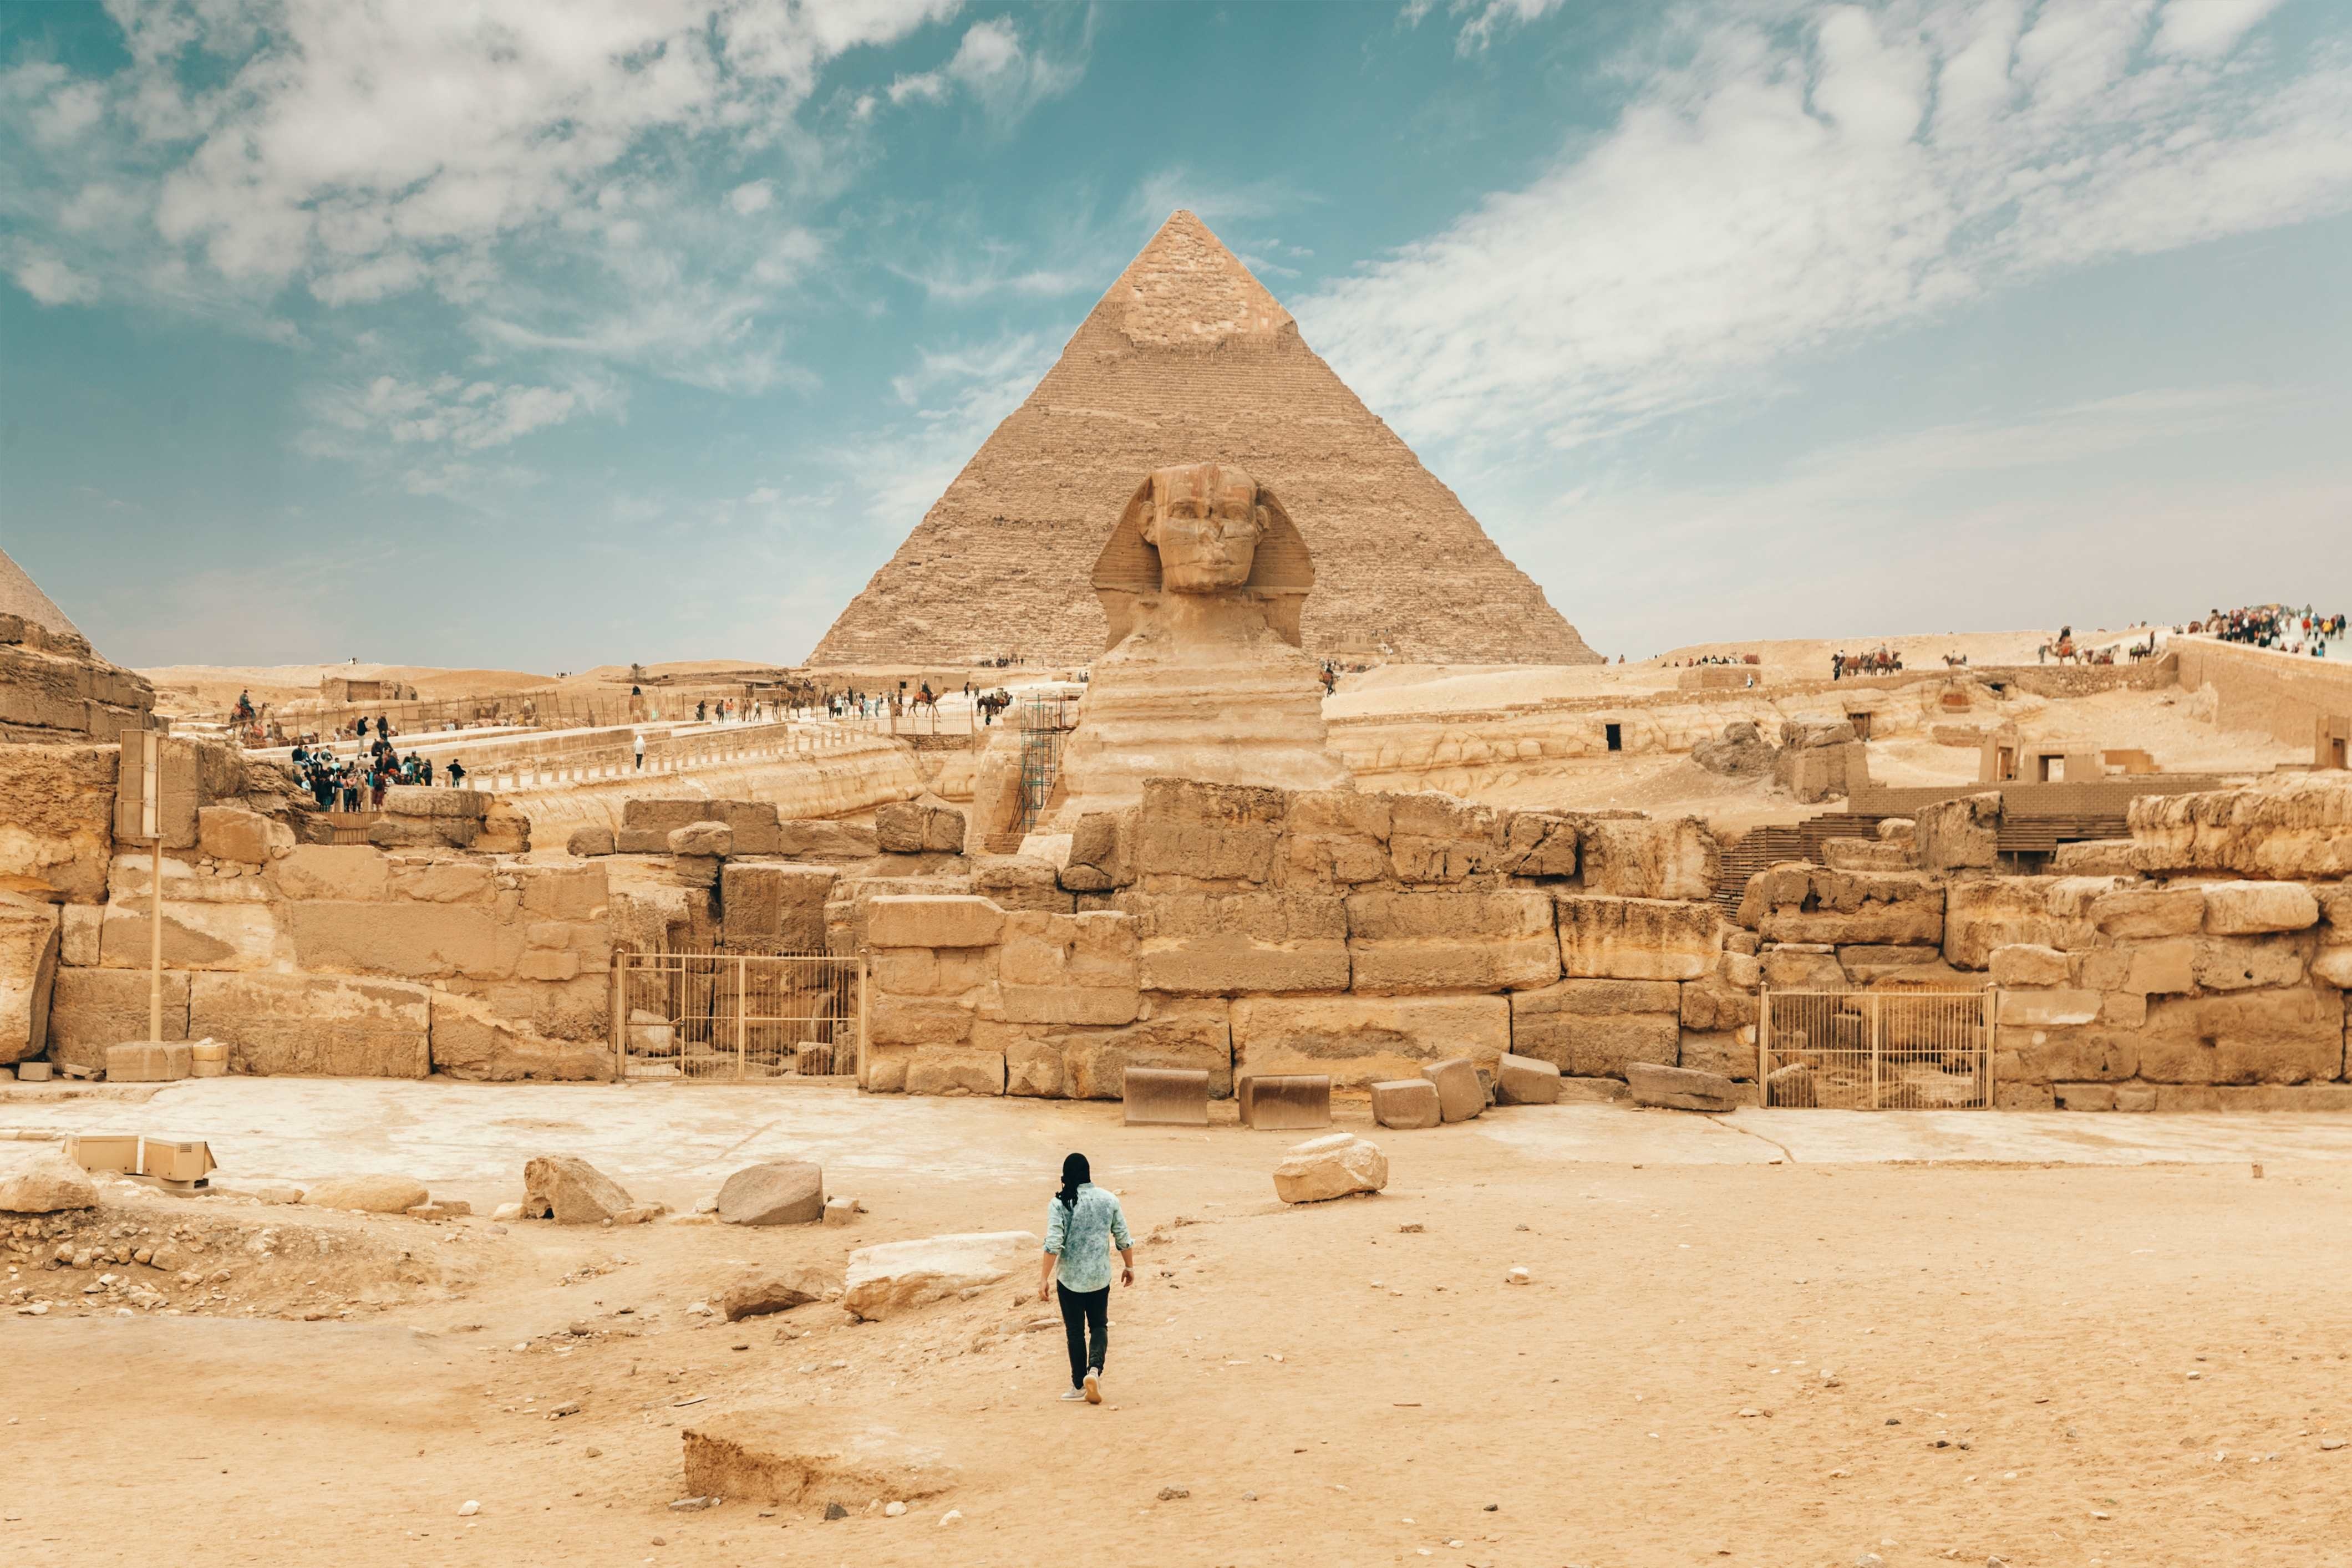 tourhub | Amisol Travel | Ancient Egypt by Train IV: Embark on a Journey to Uncover the Treasures of Egypt and Jordan in Just 9 Days | AEBTIV